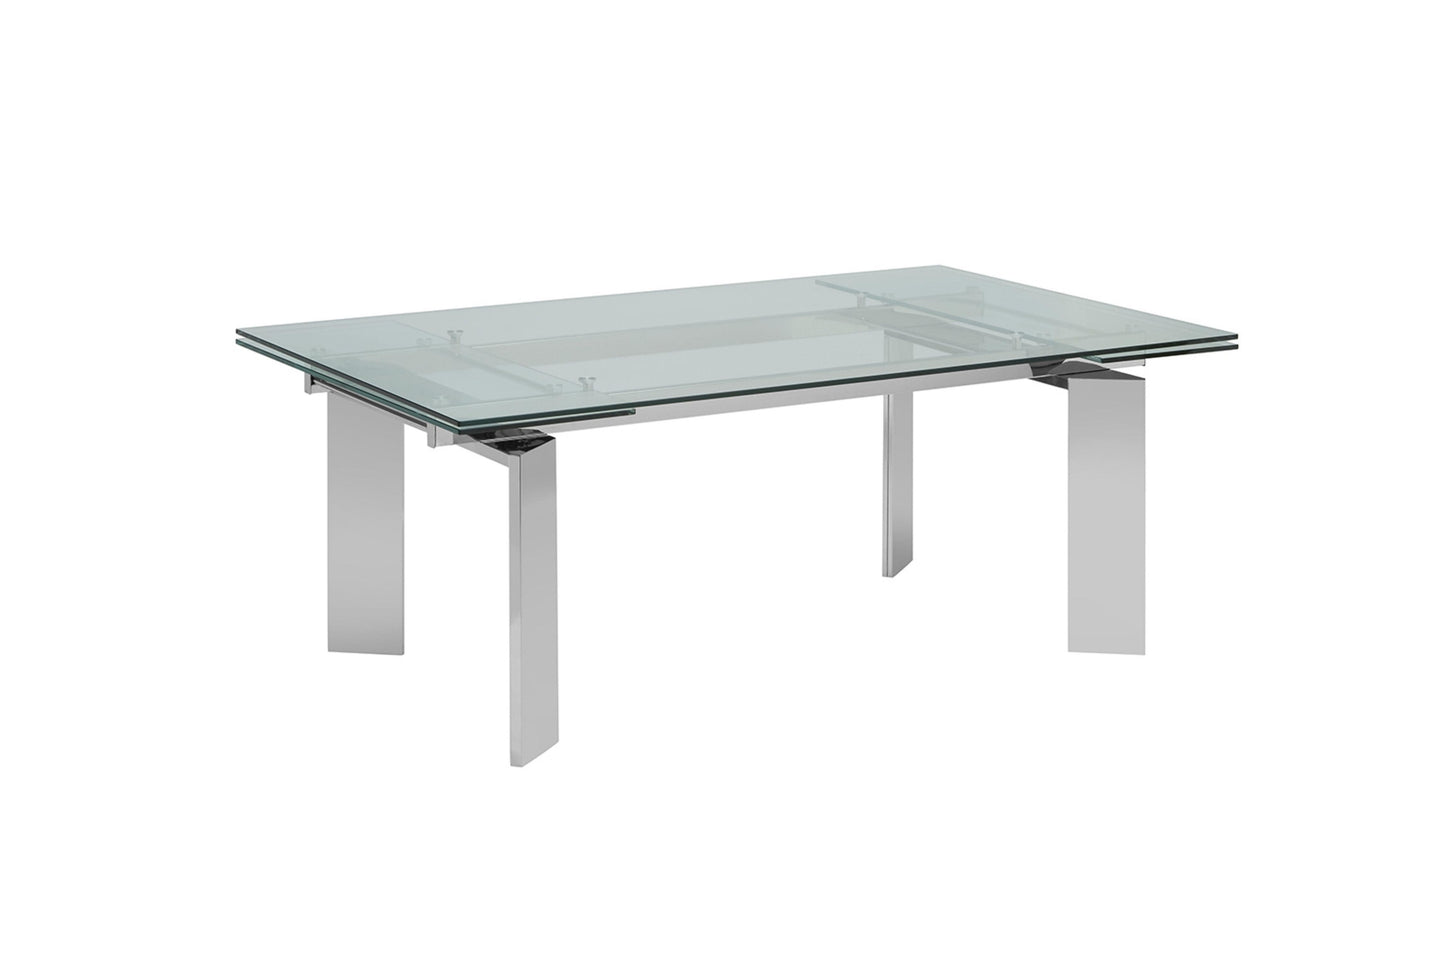  dining table in clear glass